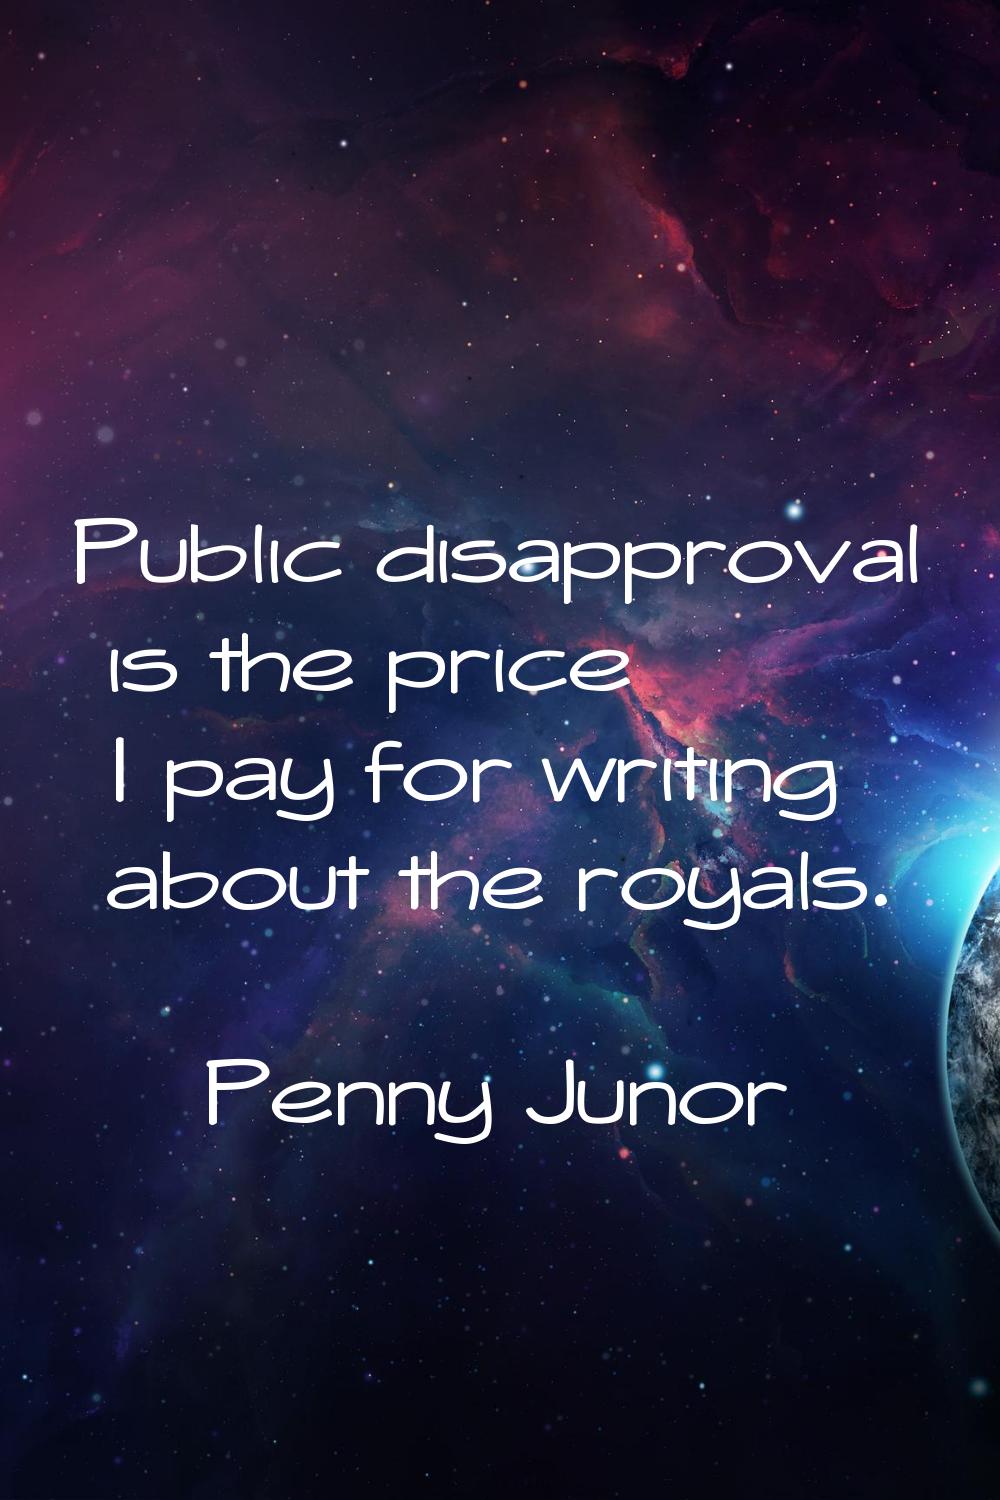 Public disapproval is the price I pay for writing about the royals.